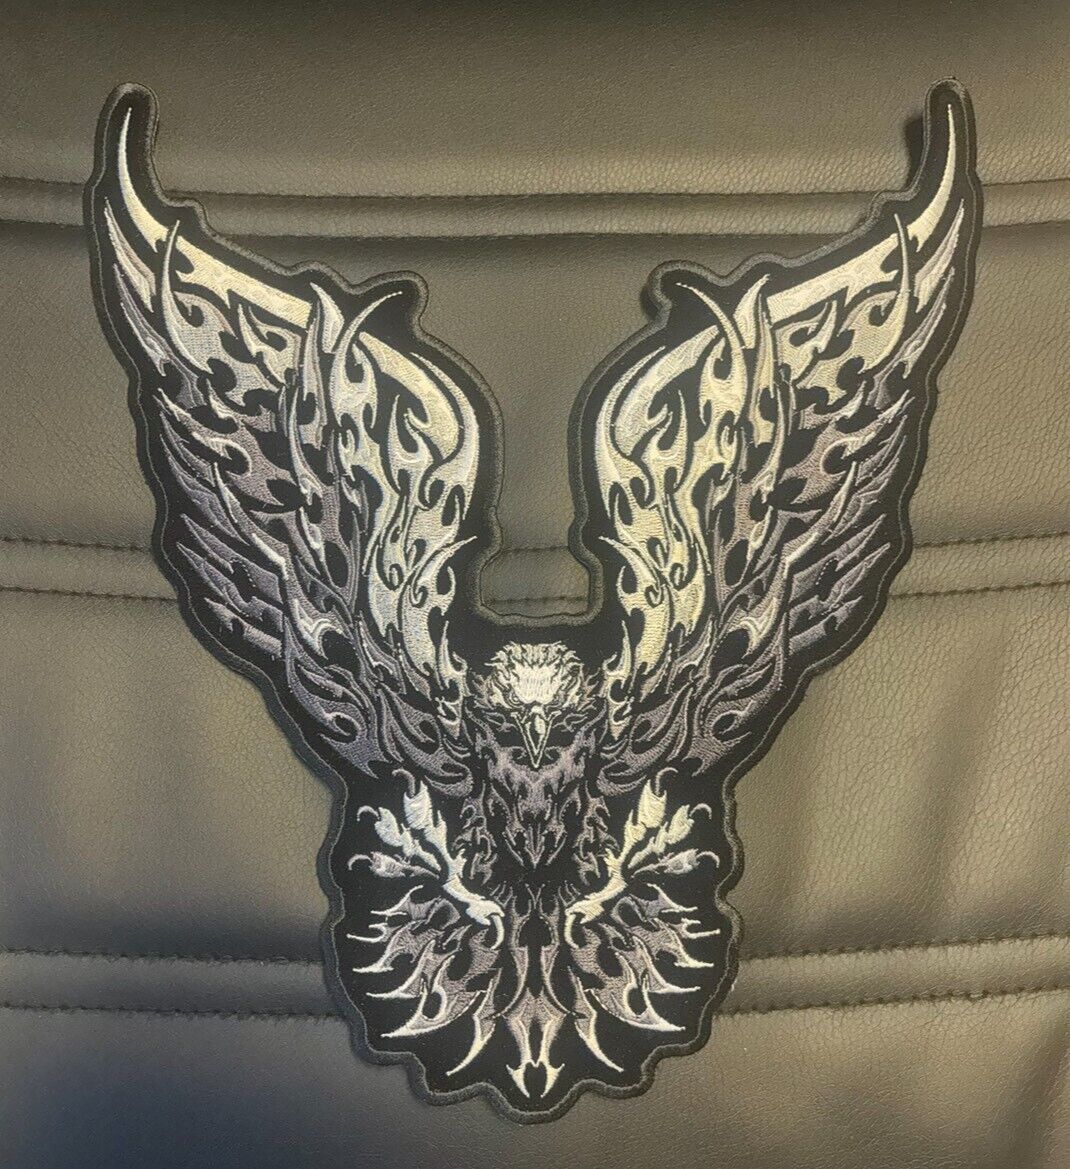 PHOENIX EAGLE WITH WHITE FLAMES LARGE BIKER PATCH IRON ON 13X11 INCH